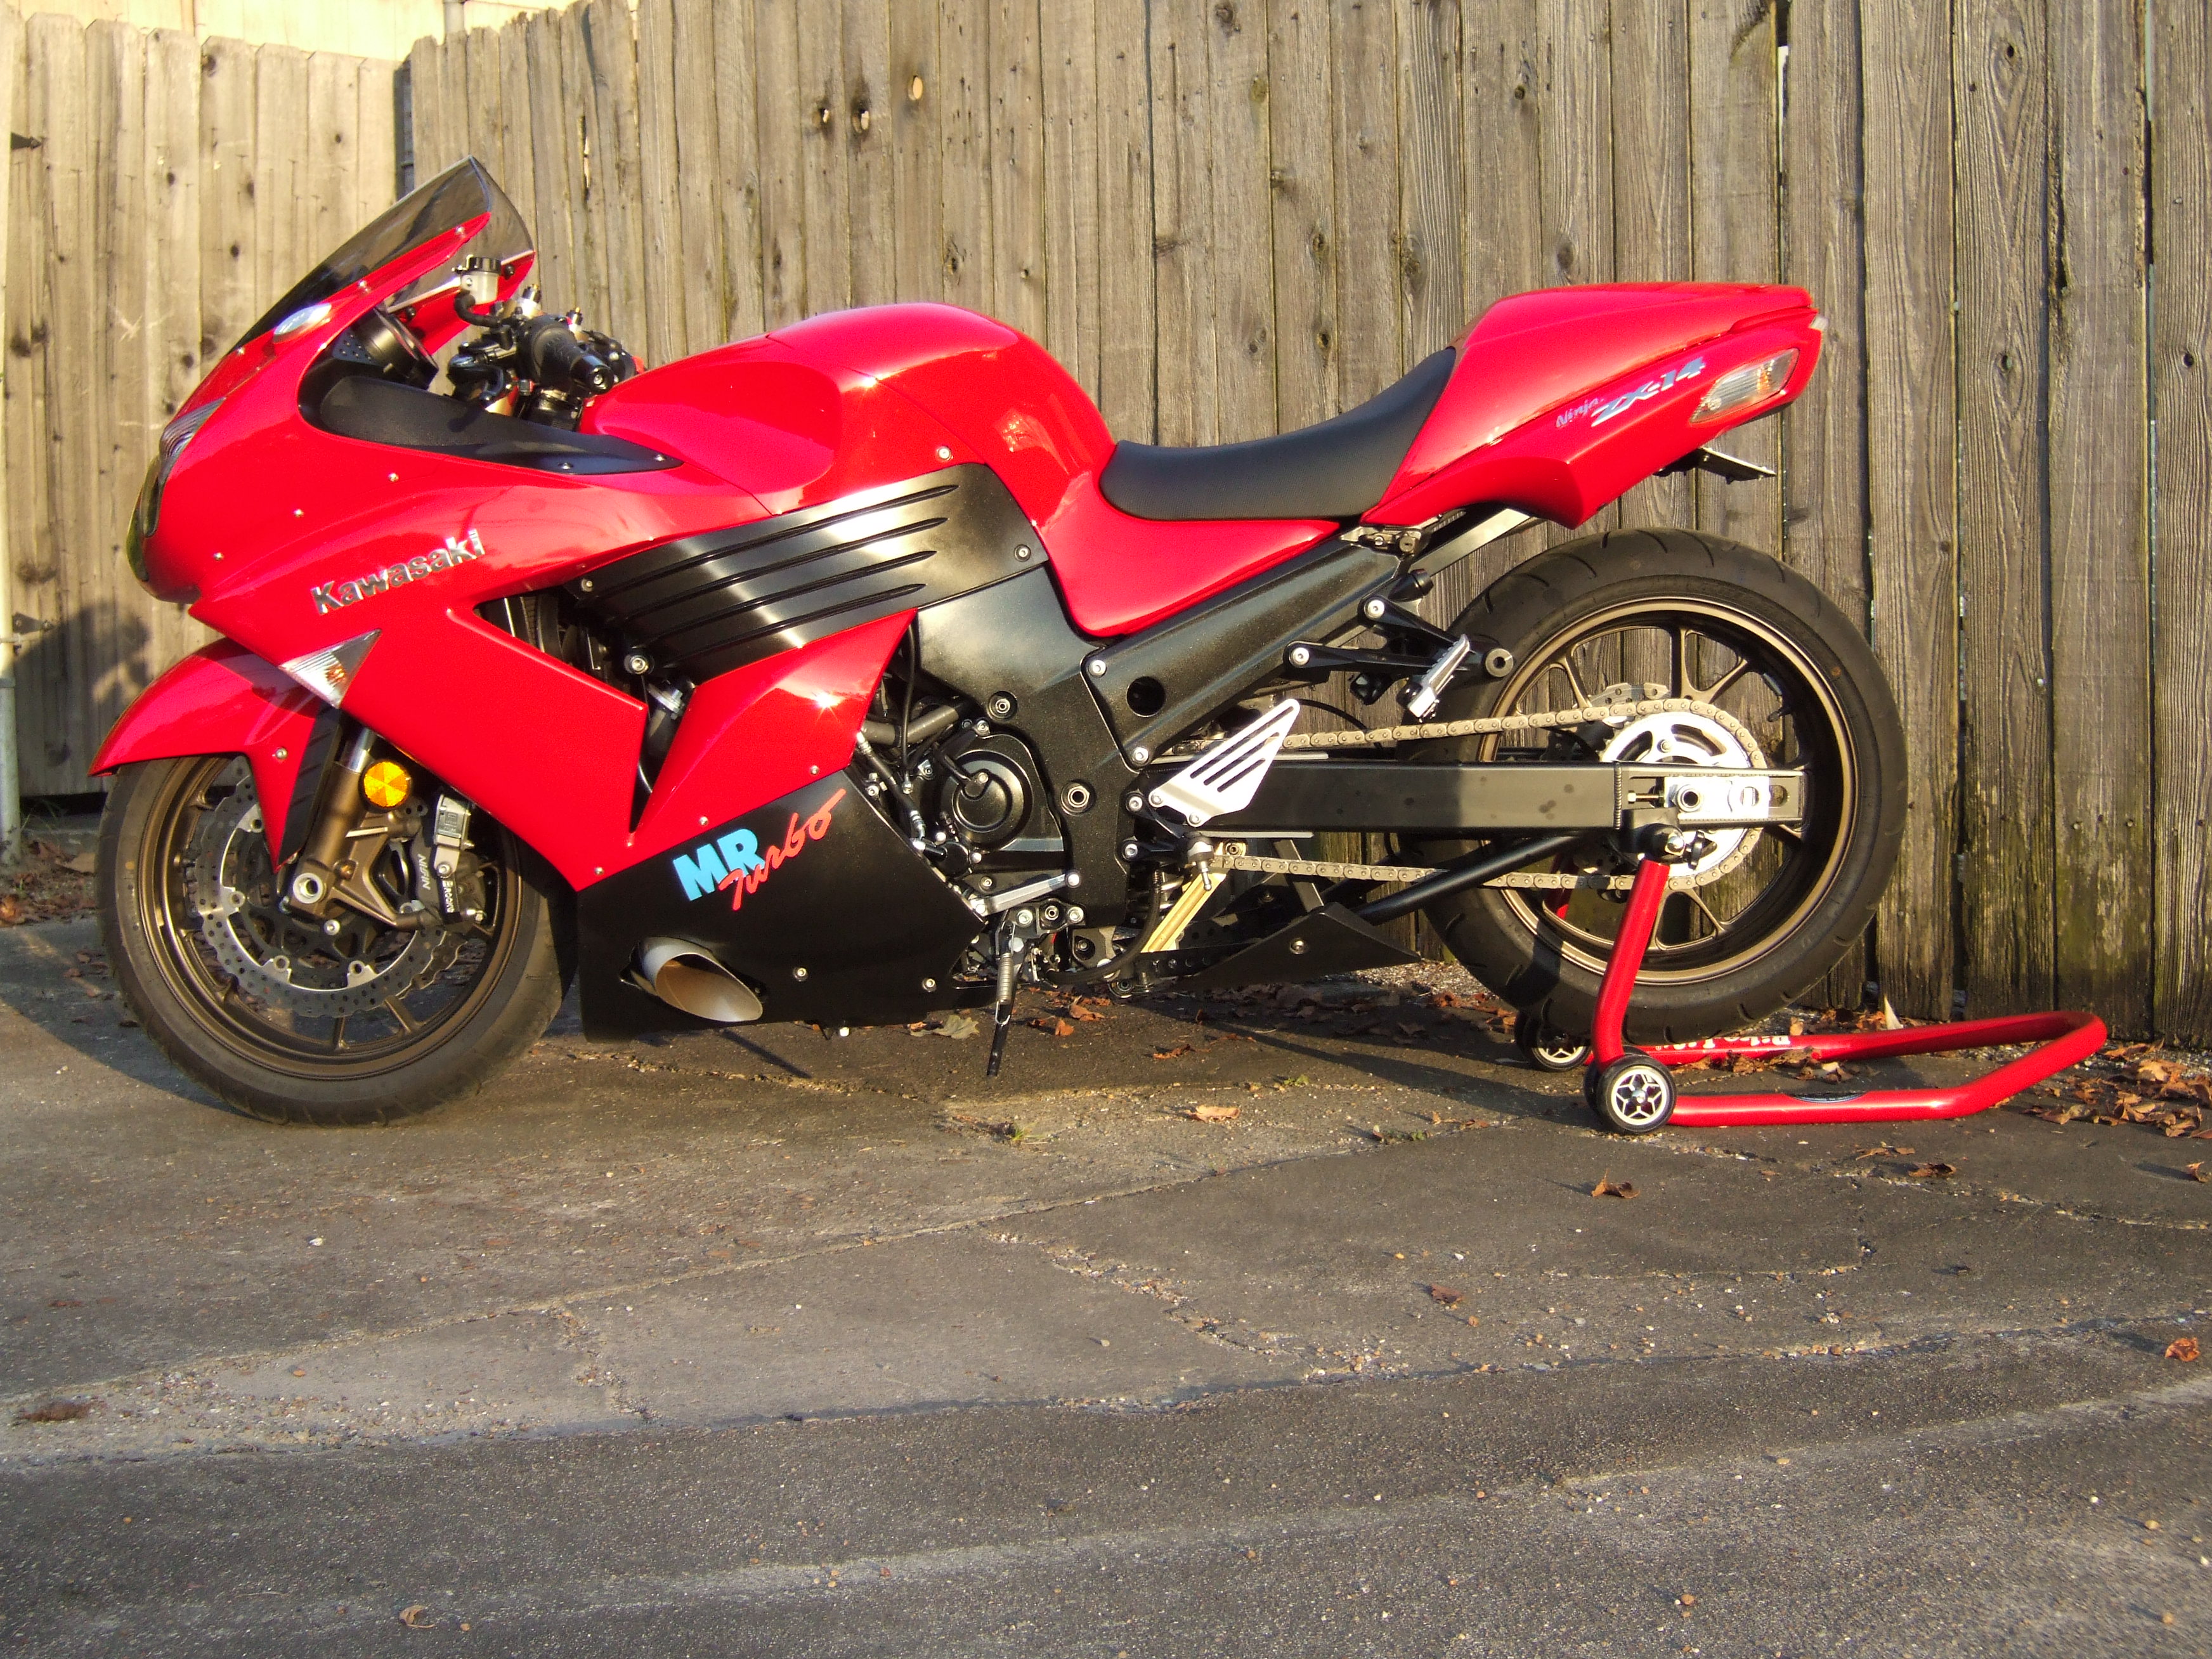 Index of /ZX-14/pictures/others